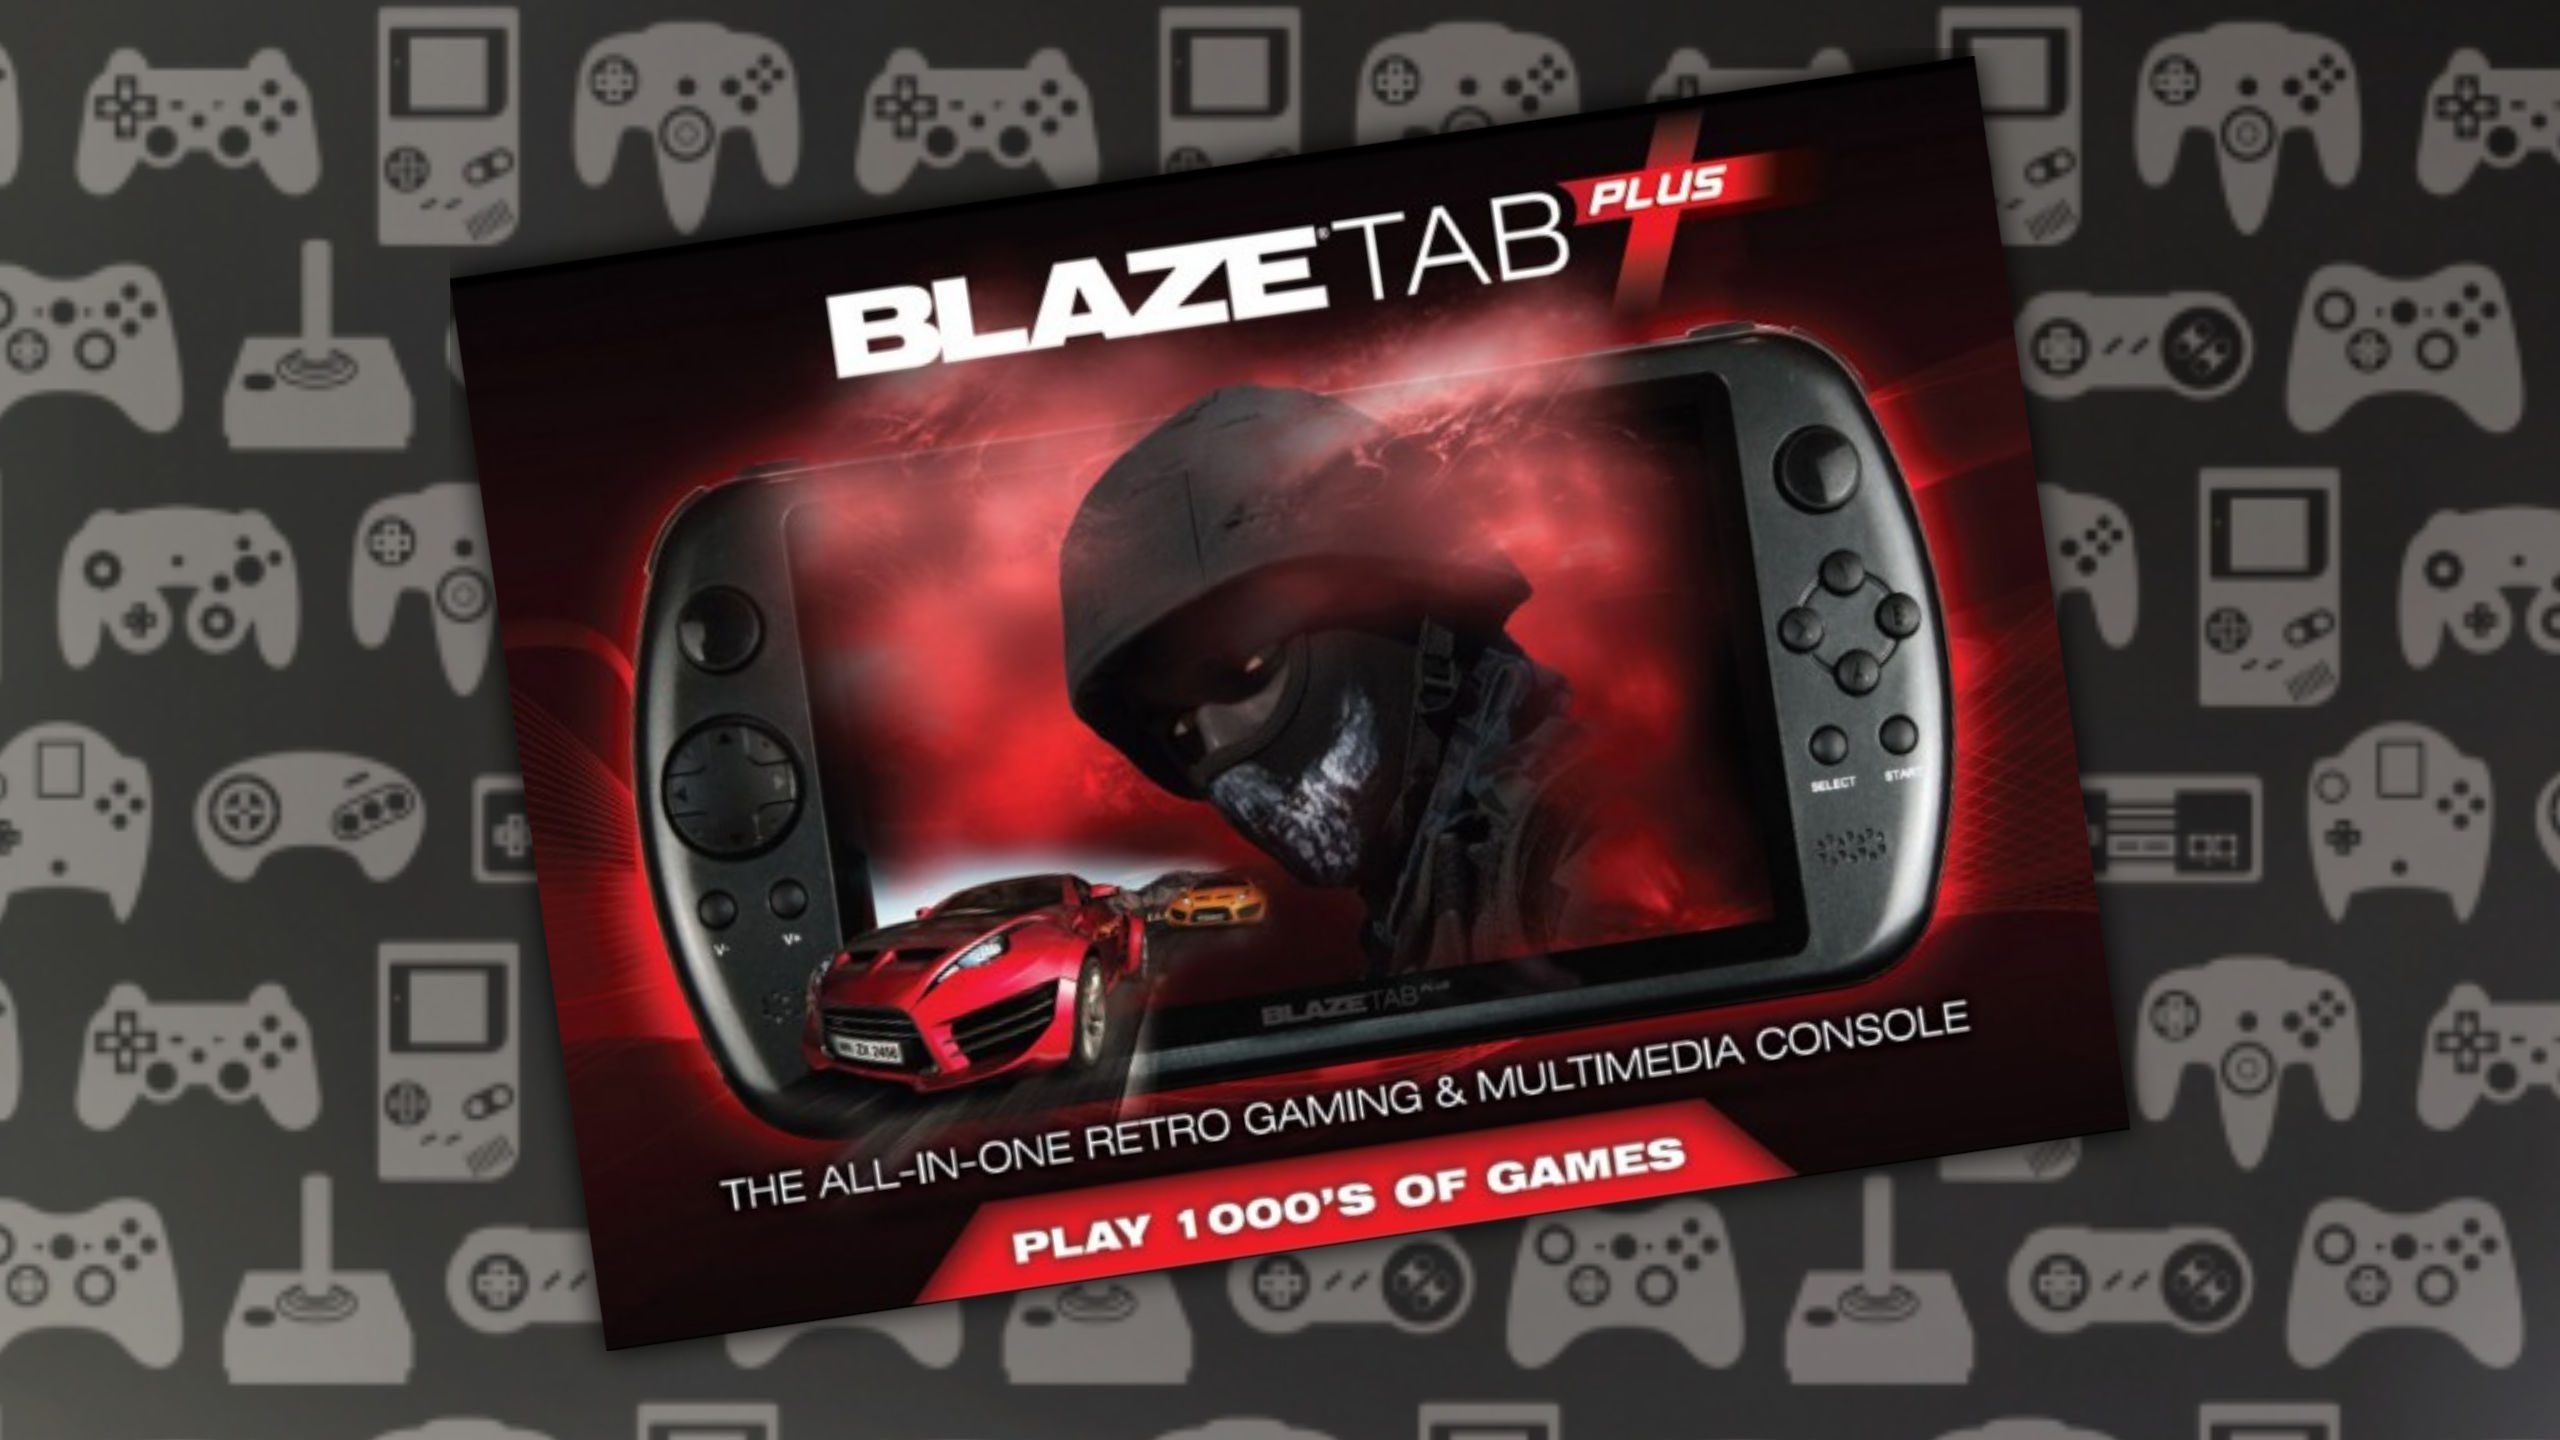 Retro Gaming System that Fits in Your Pocket? BlazeTab Plus Review